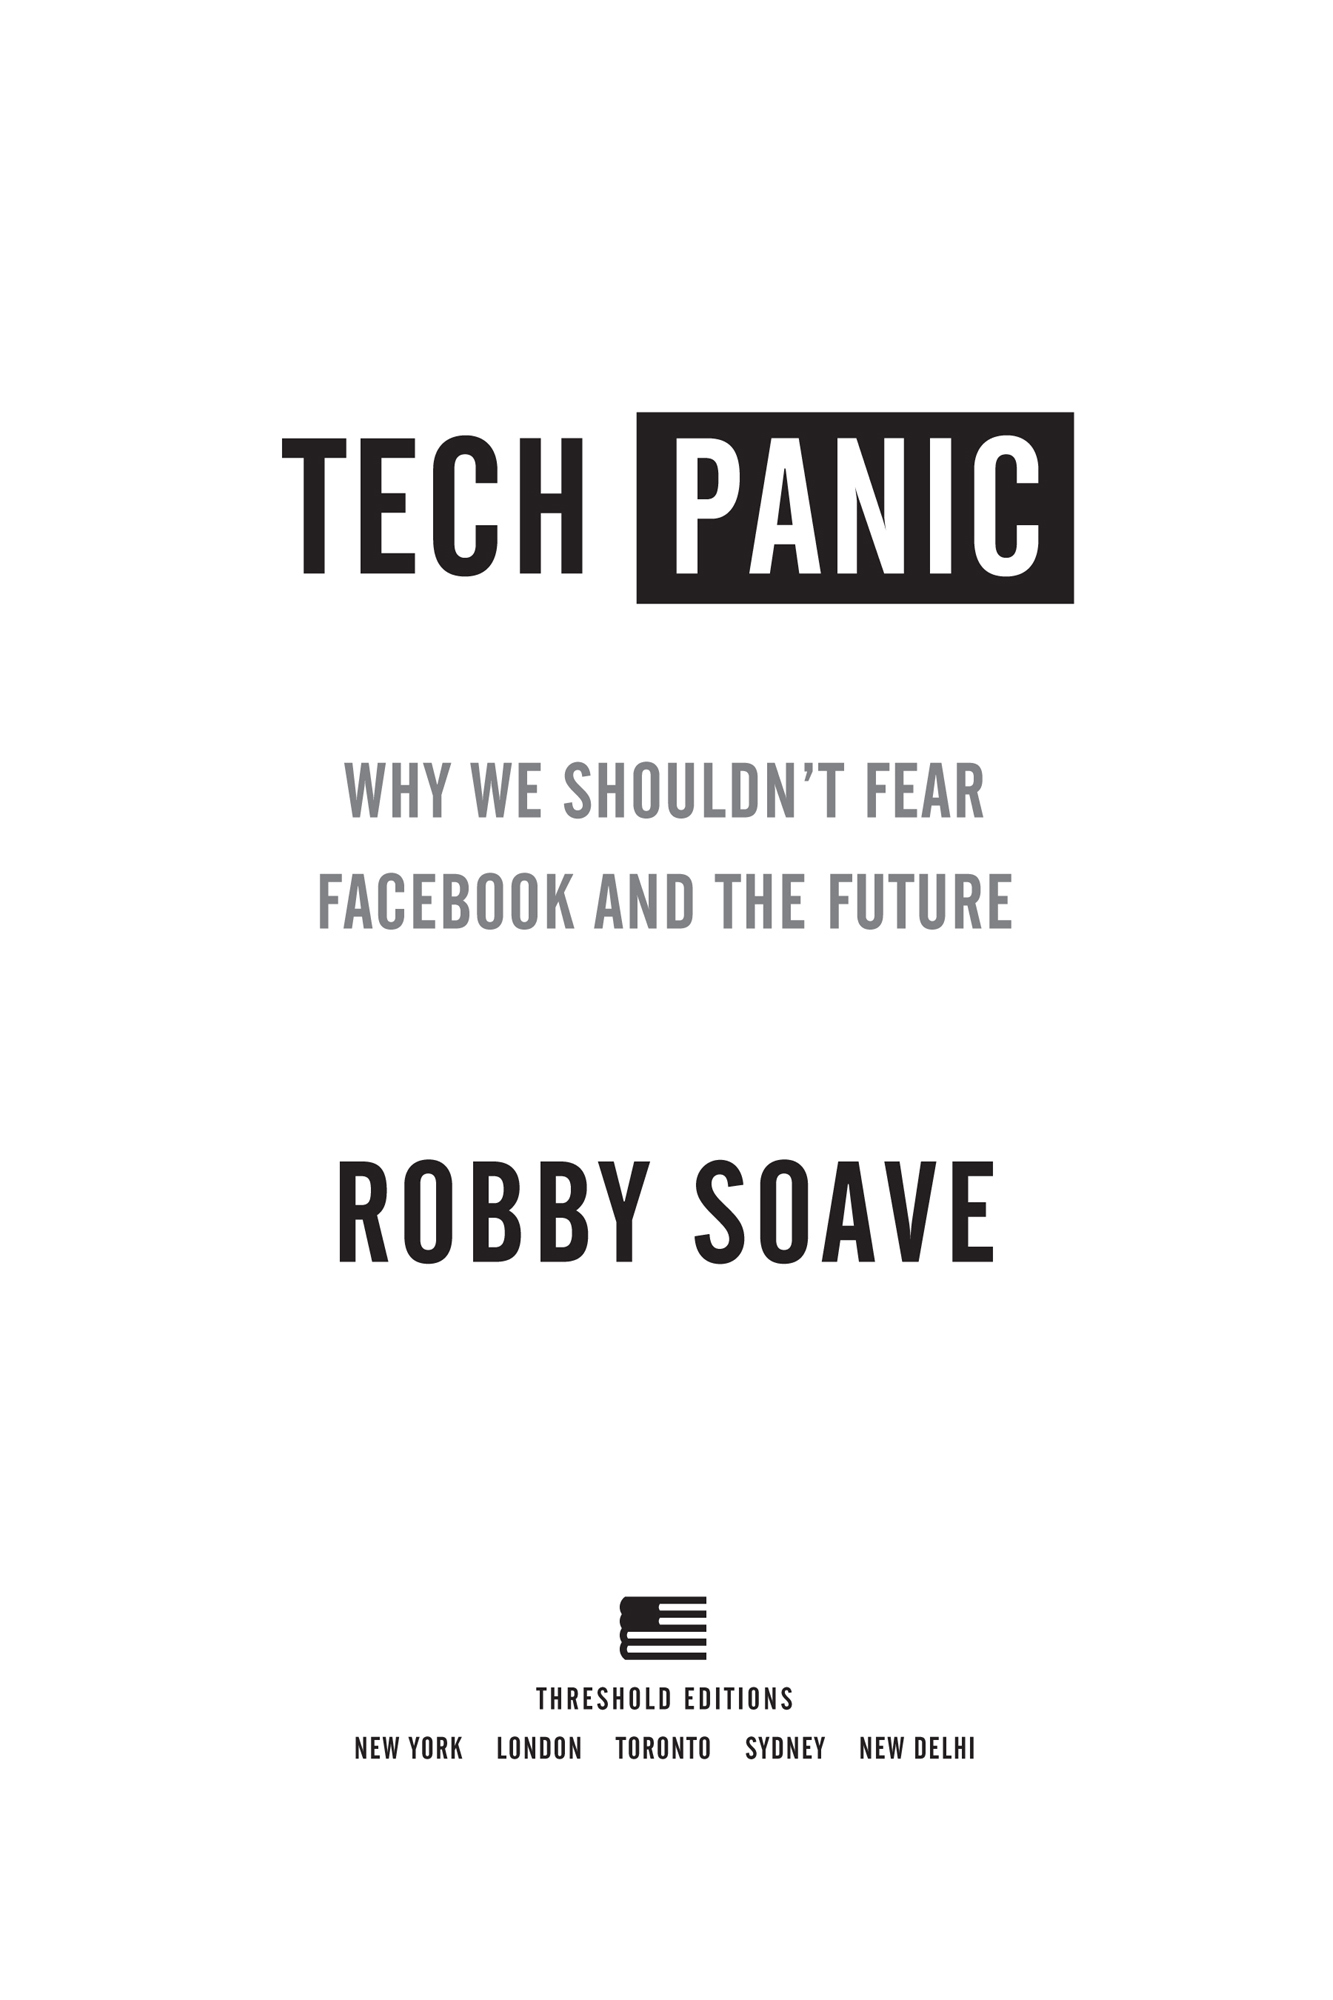 ALSO BY ROBBY SOAVE Panic Attack Young Radicals in the Age of Trump - photo 2